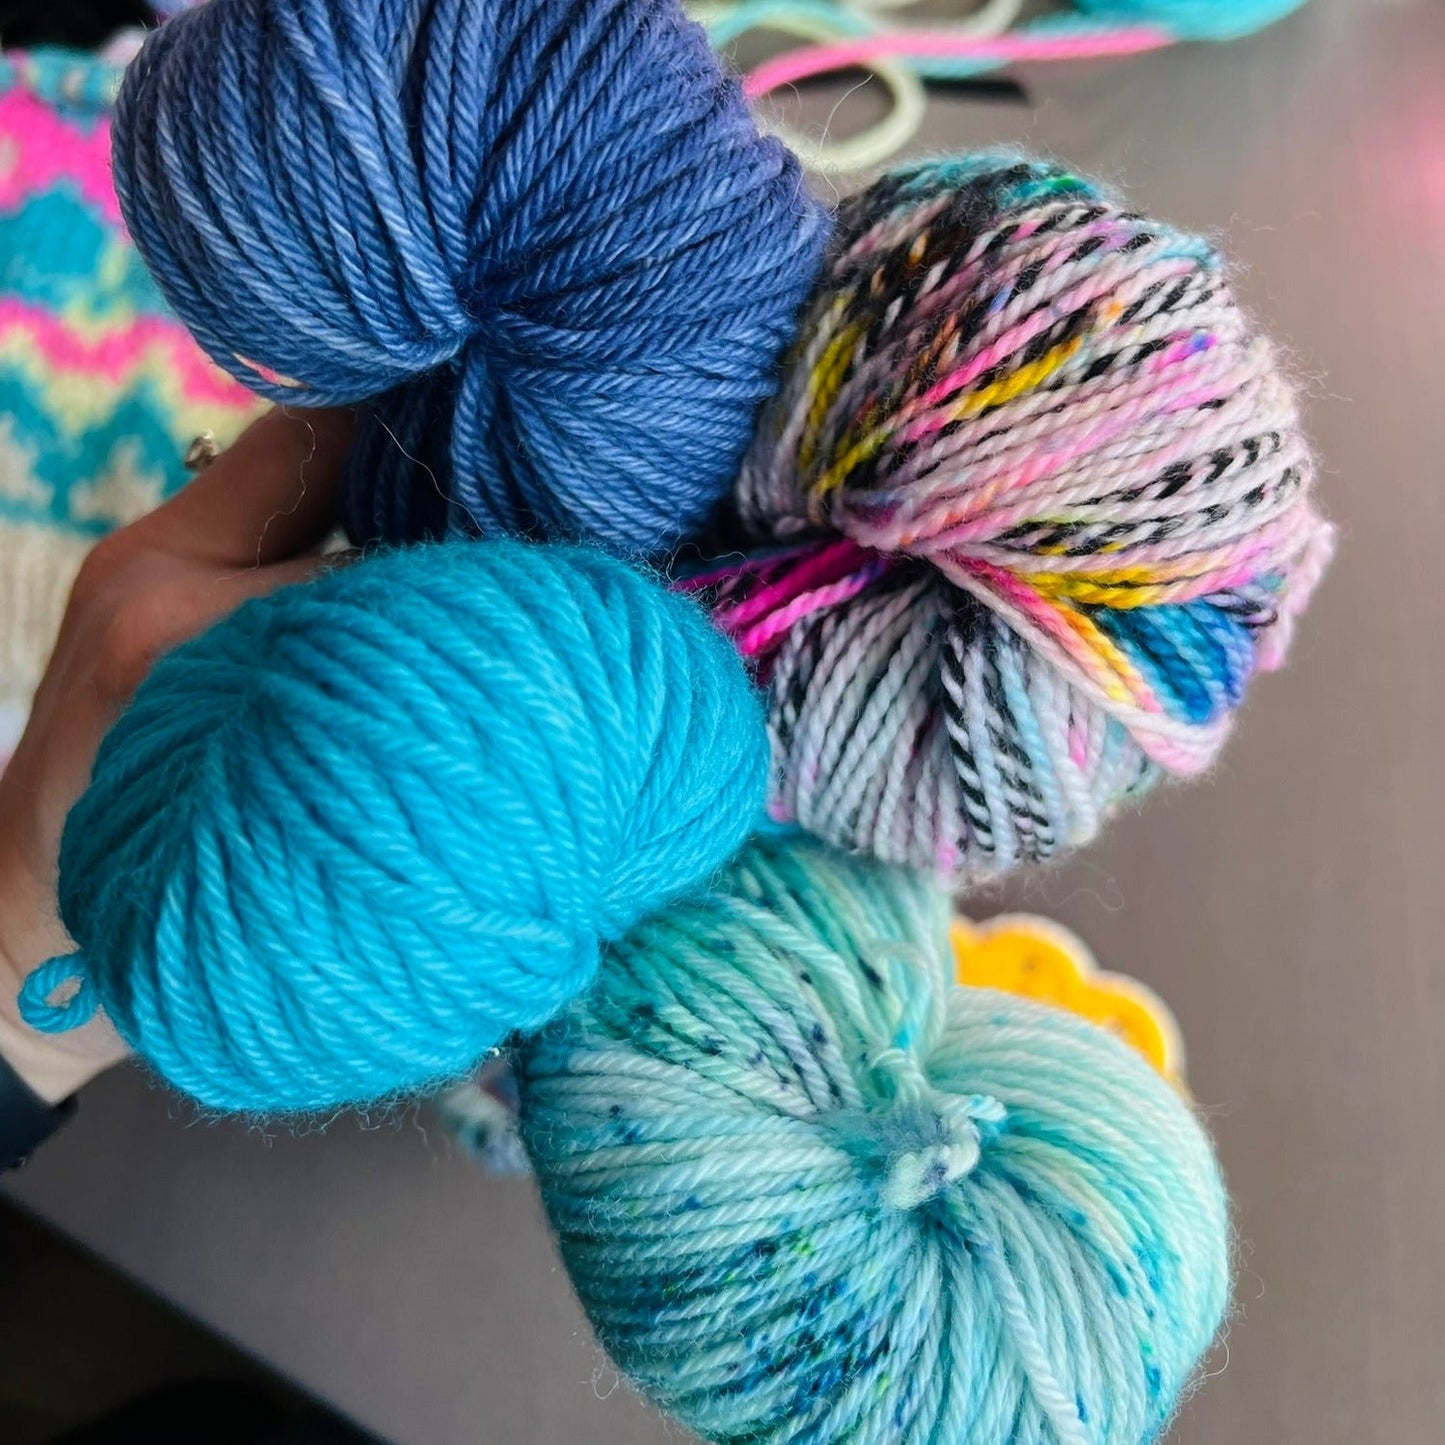 view of summer camp yarn blues